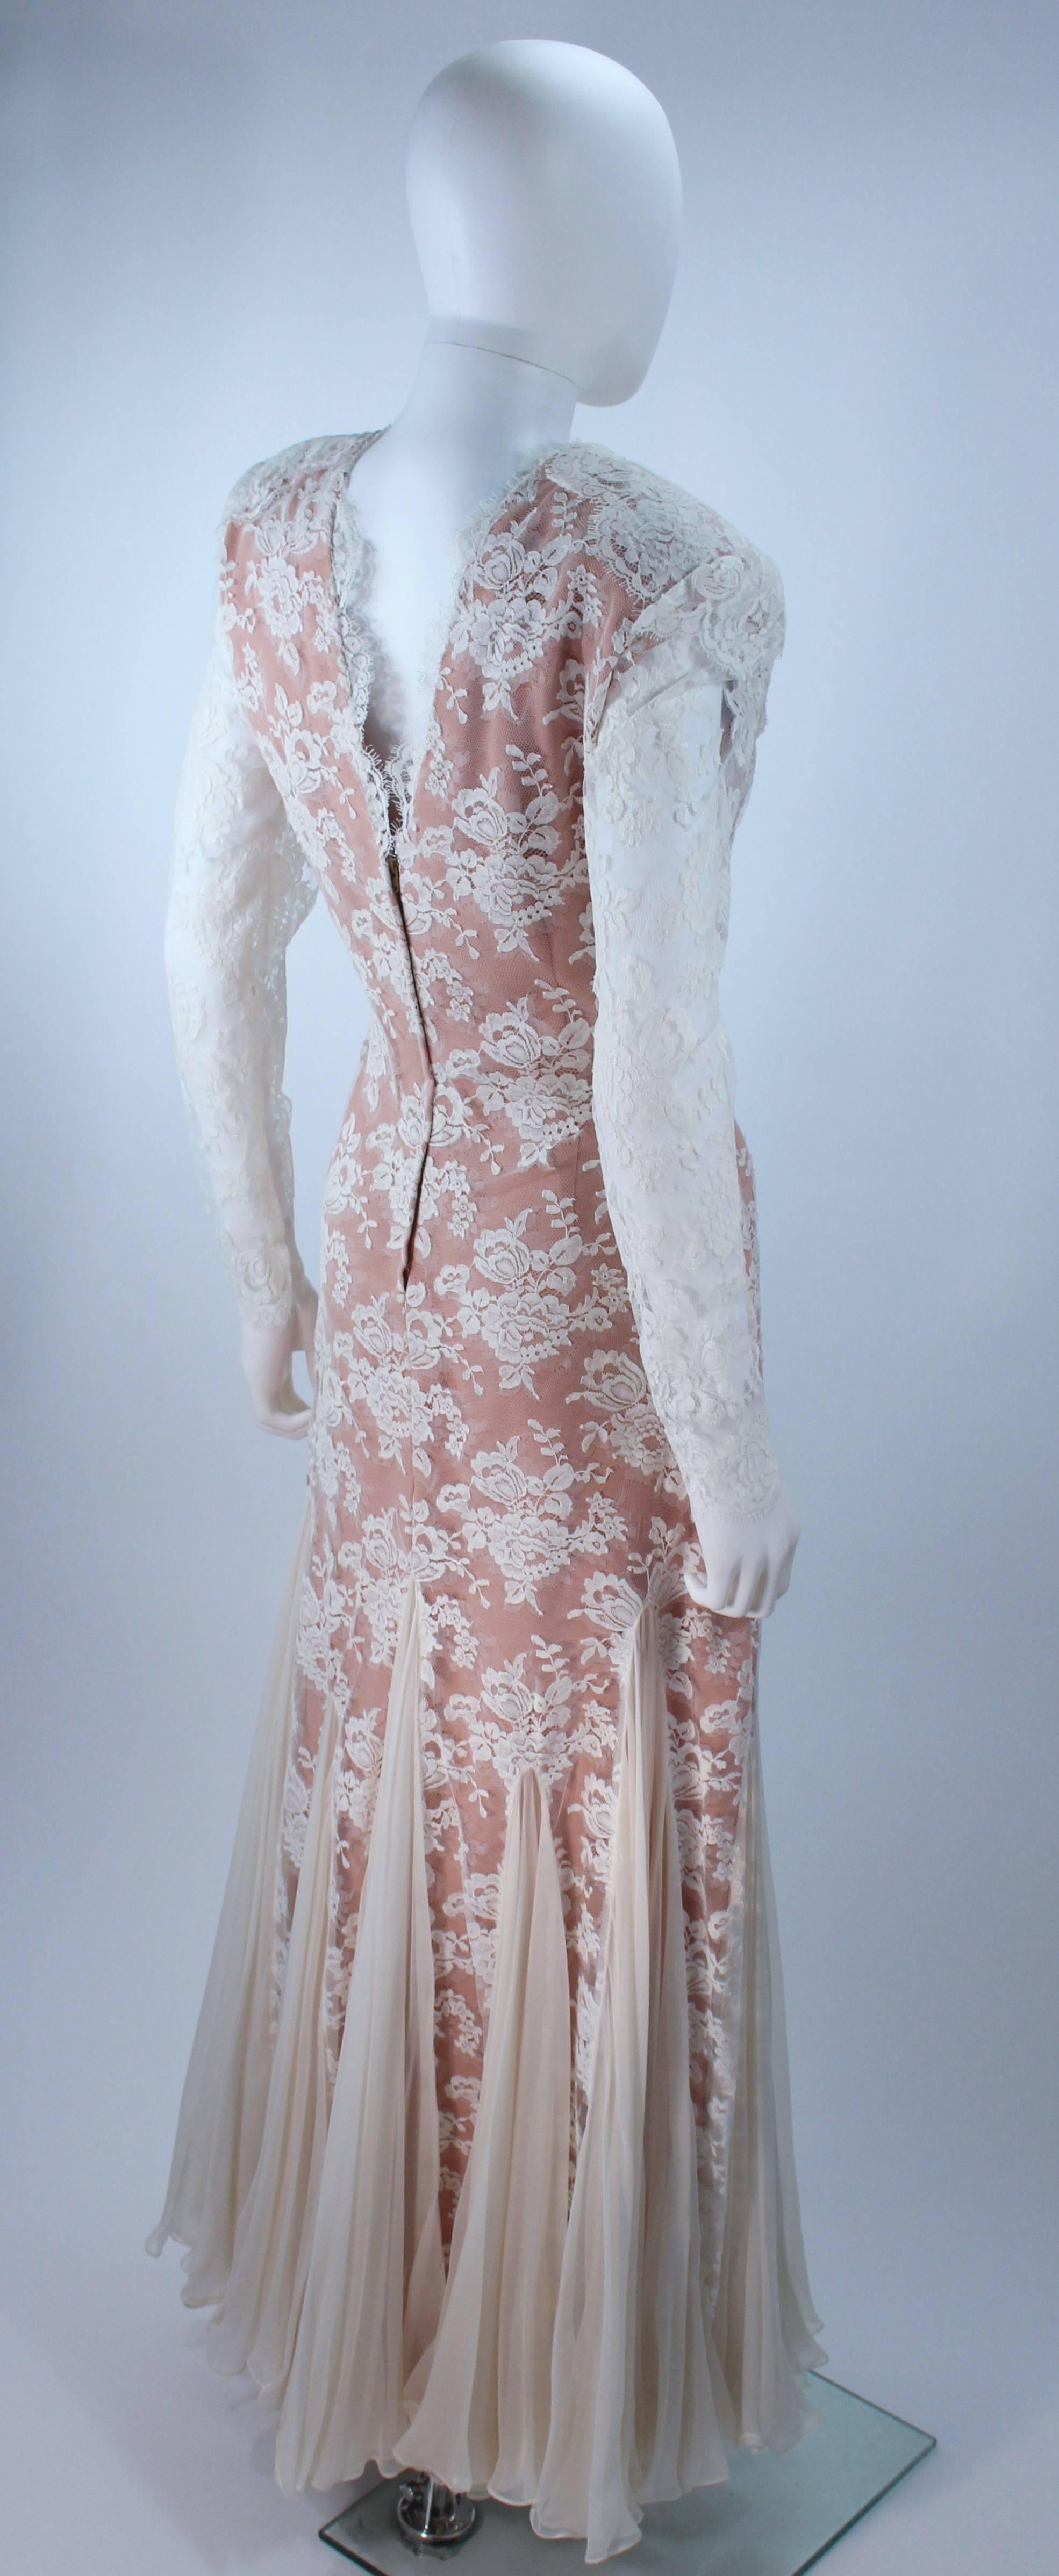 TRAVILLA Lace Gown with Nude Underlay Size 4 6 In Excellent Condition For Sale In Los Angeles, CA